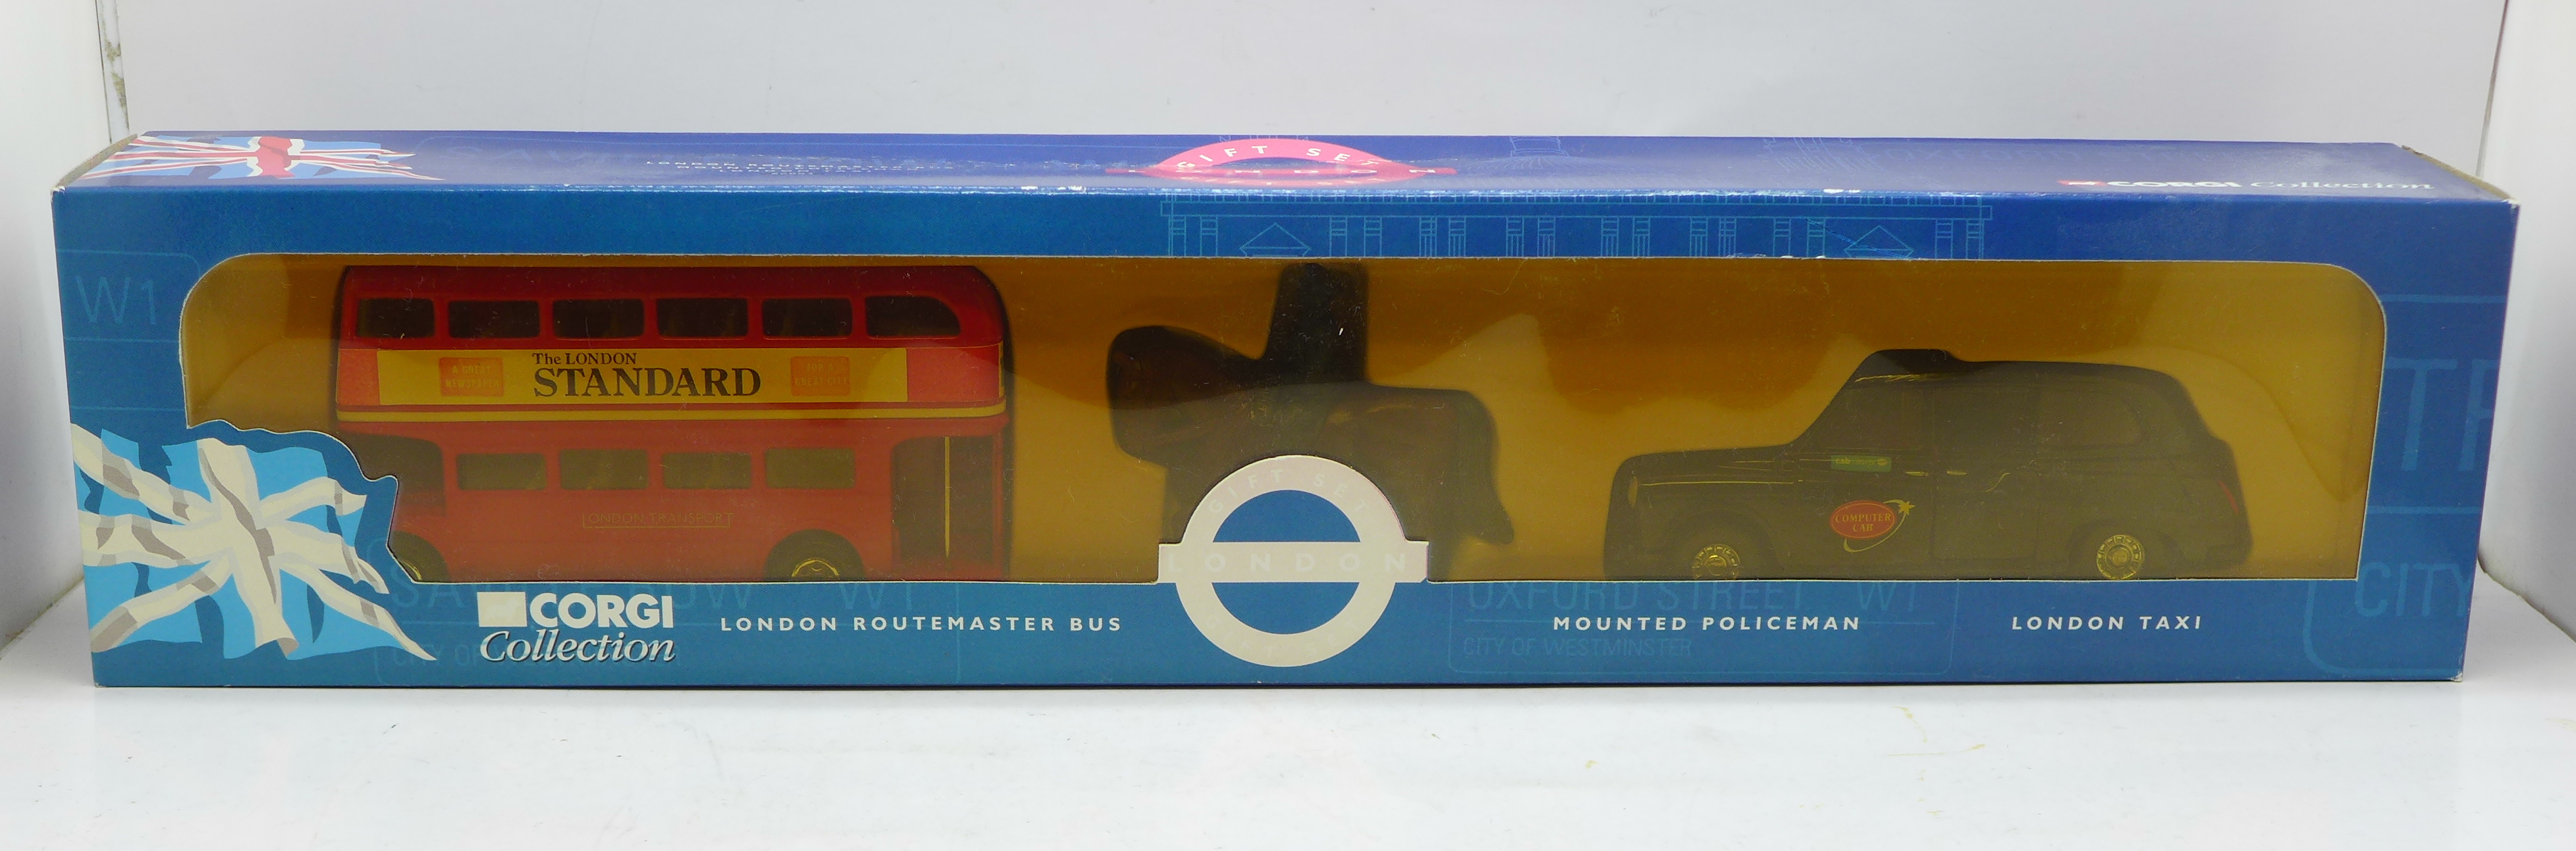 A Corgi Collection, 60003, London Gift Set, Routemaster bus, mounted Policeman and Taxi, boxed - Image 2 of 8